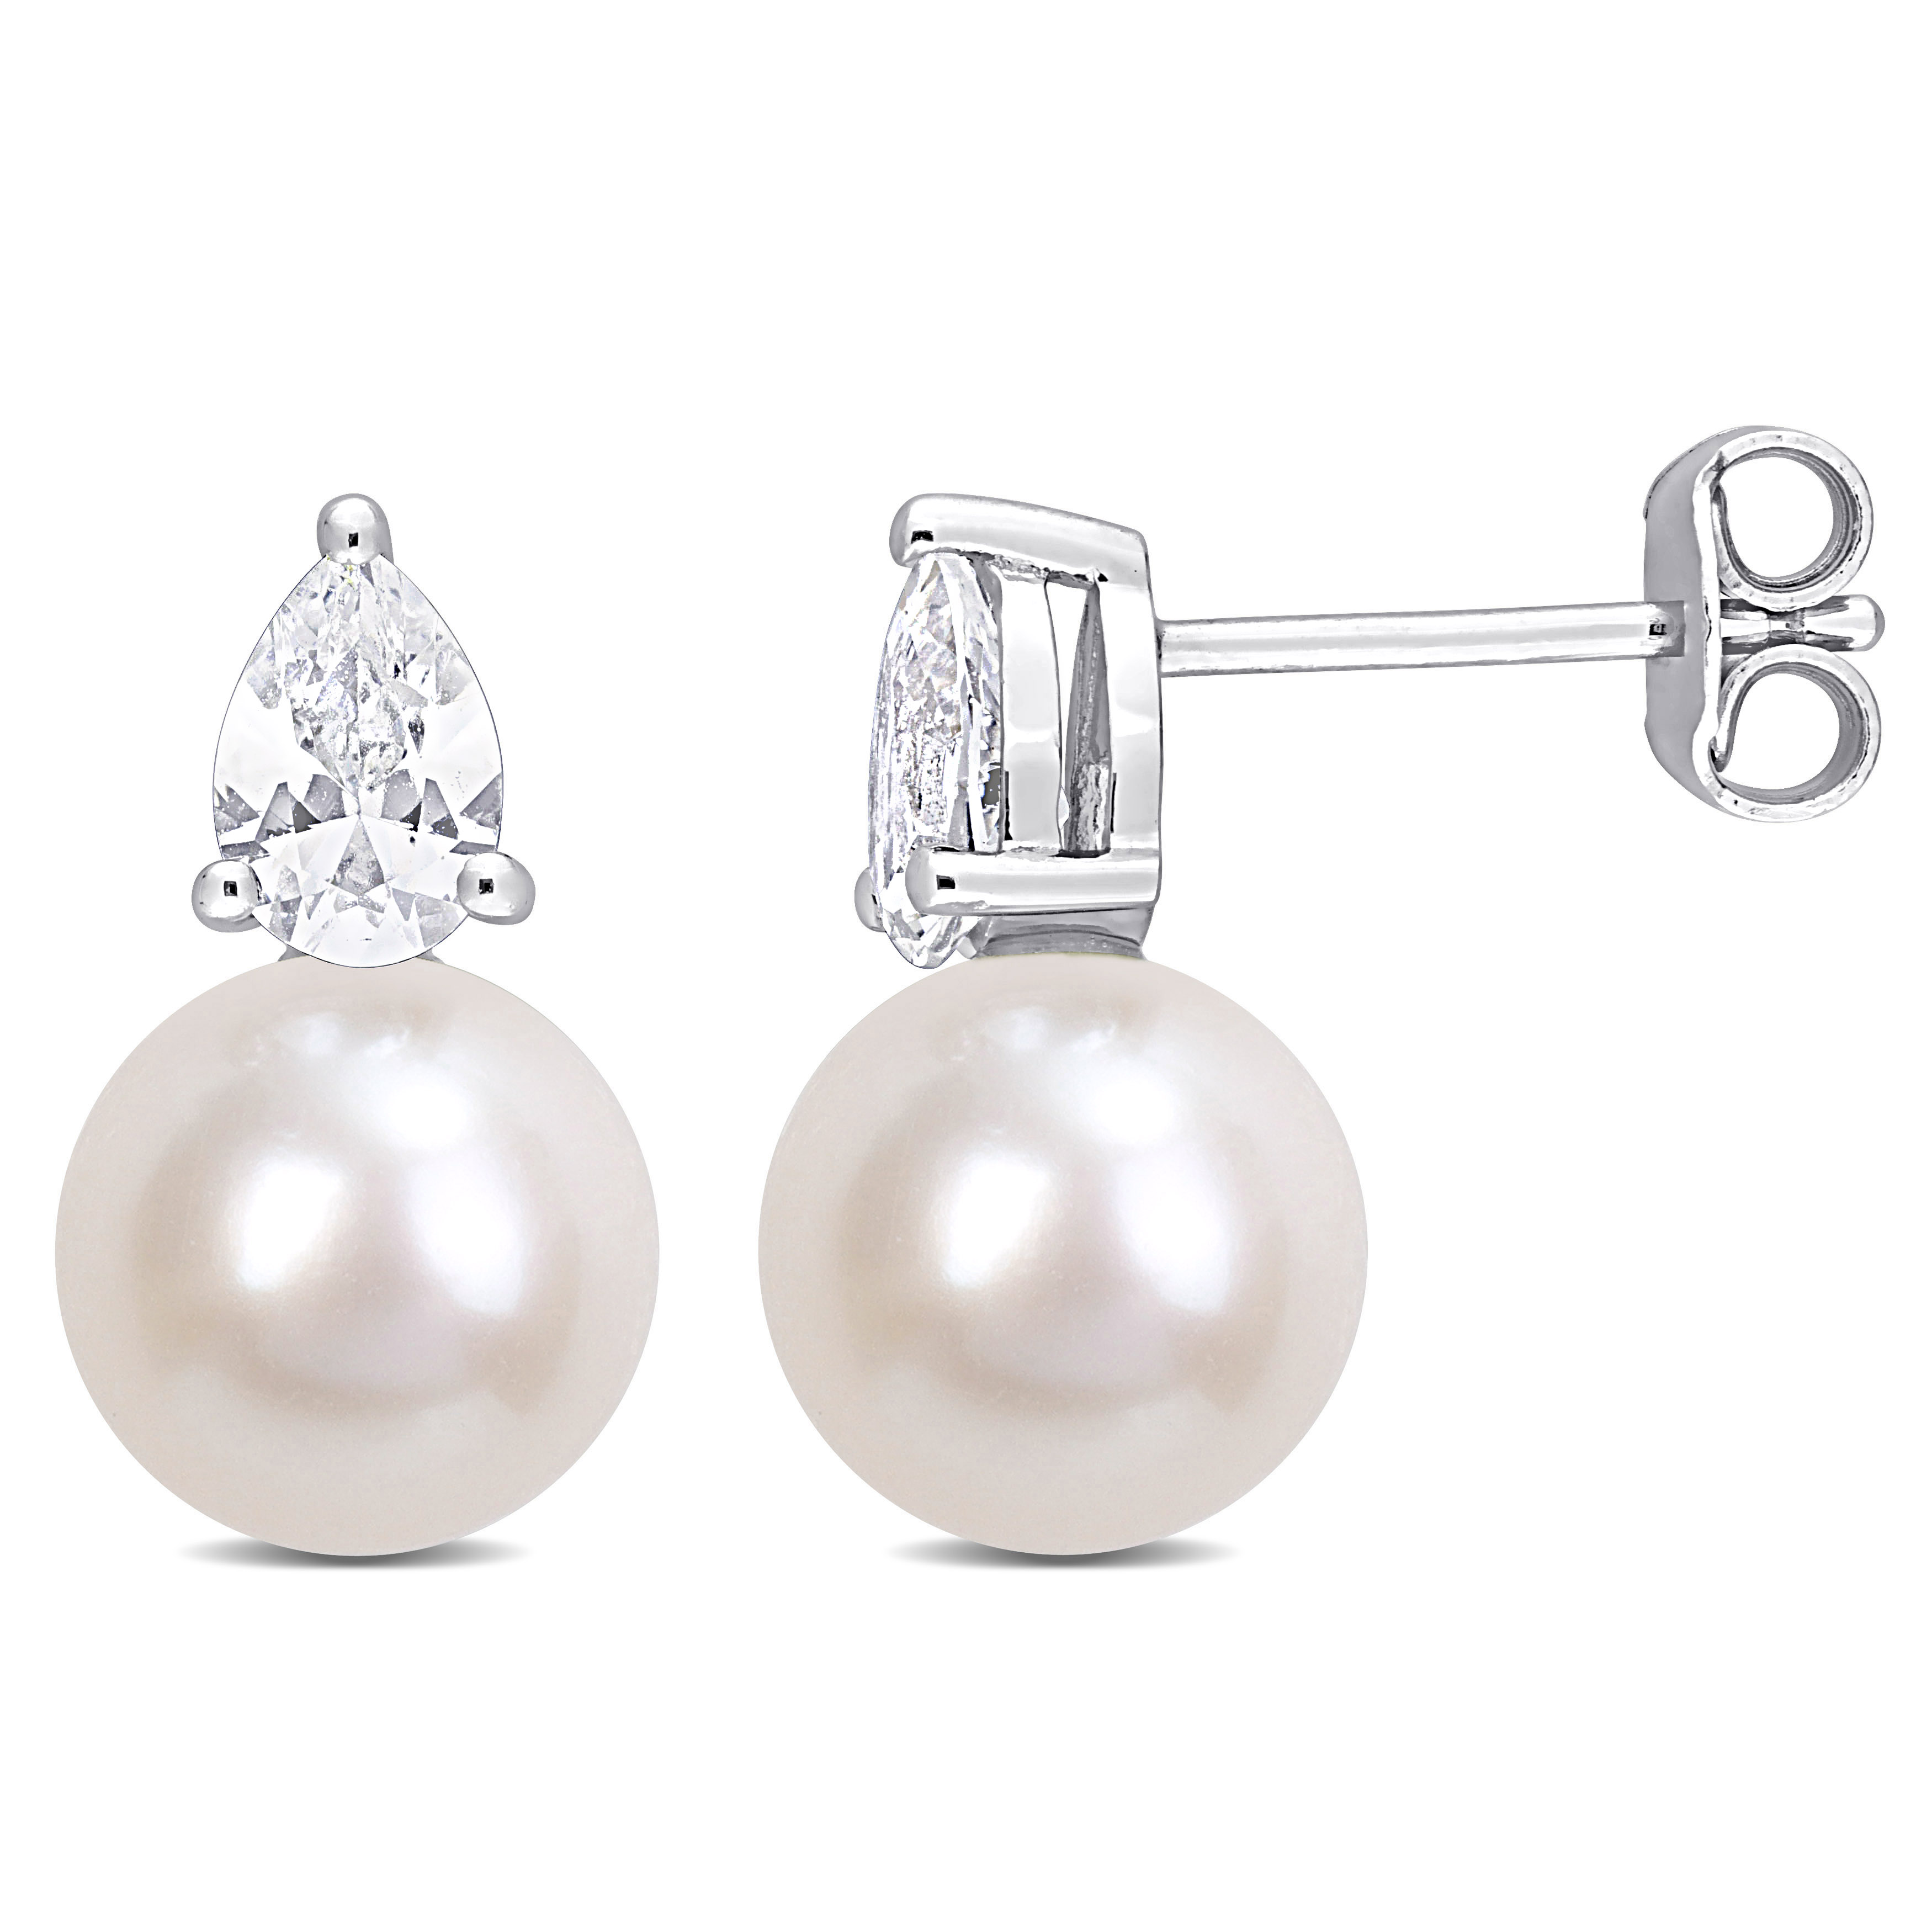 8.5-9 MM White Freshwater Cultured Pearl and 1 1/3 CT TGW Created White Sapphire Stud Earrings in Sterling Silver